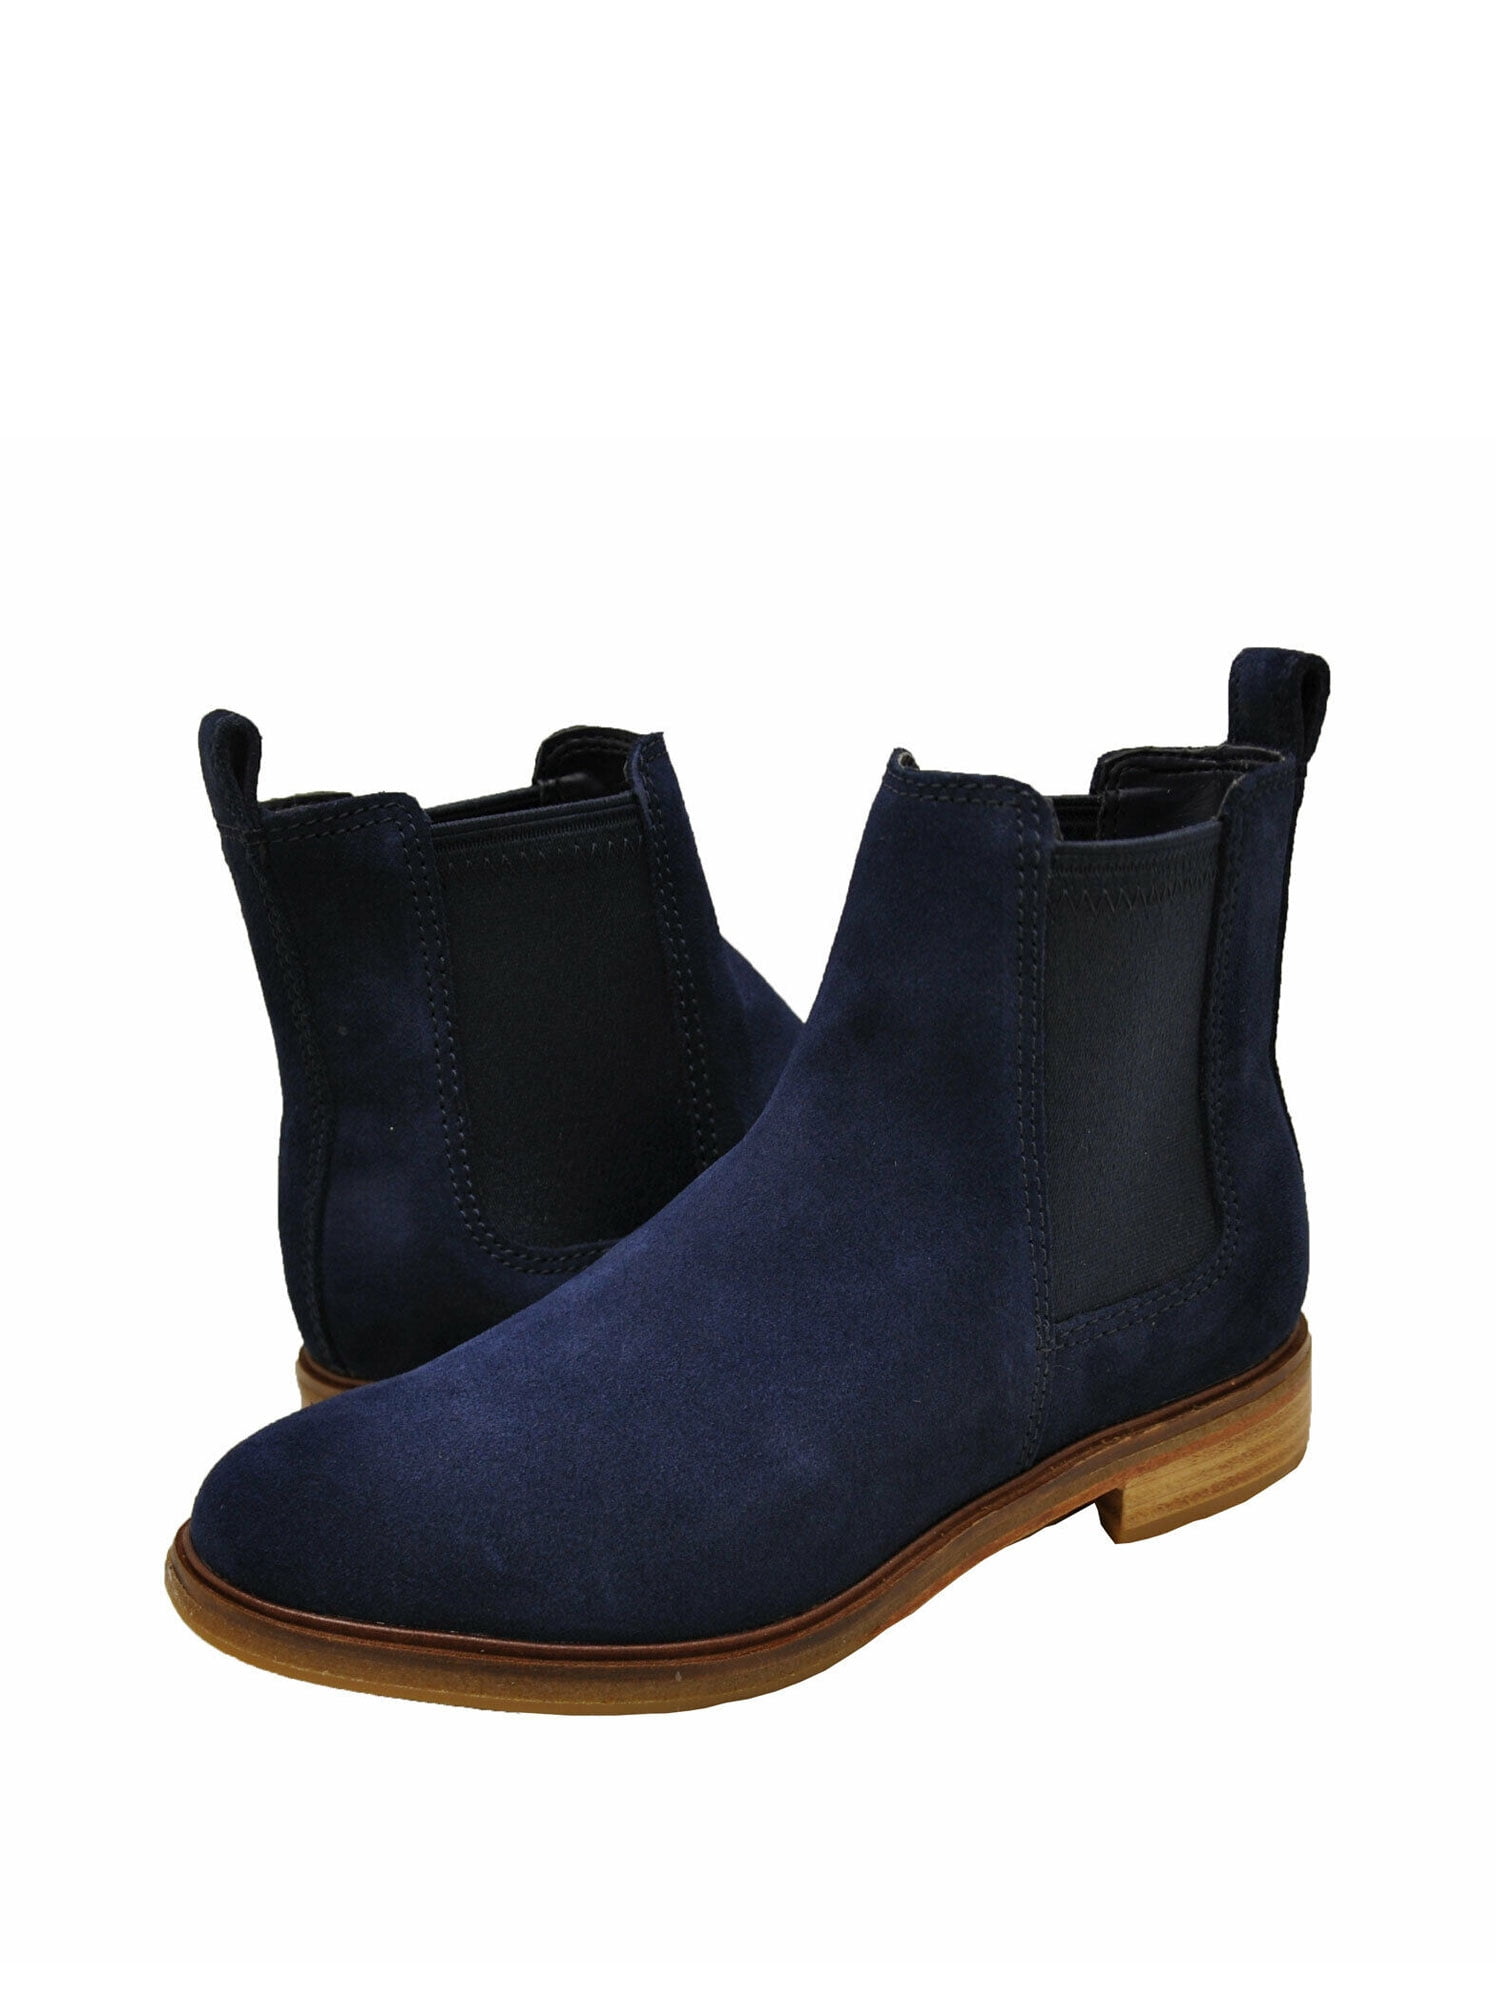 Clarks Womens Clarkdale Arlo Suede Ankle Chelsea Boots